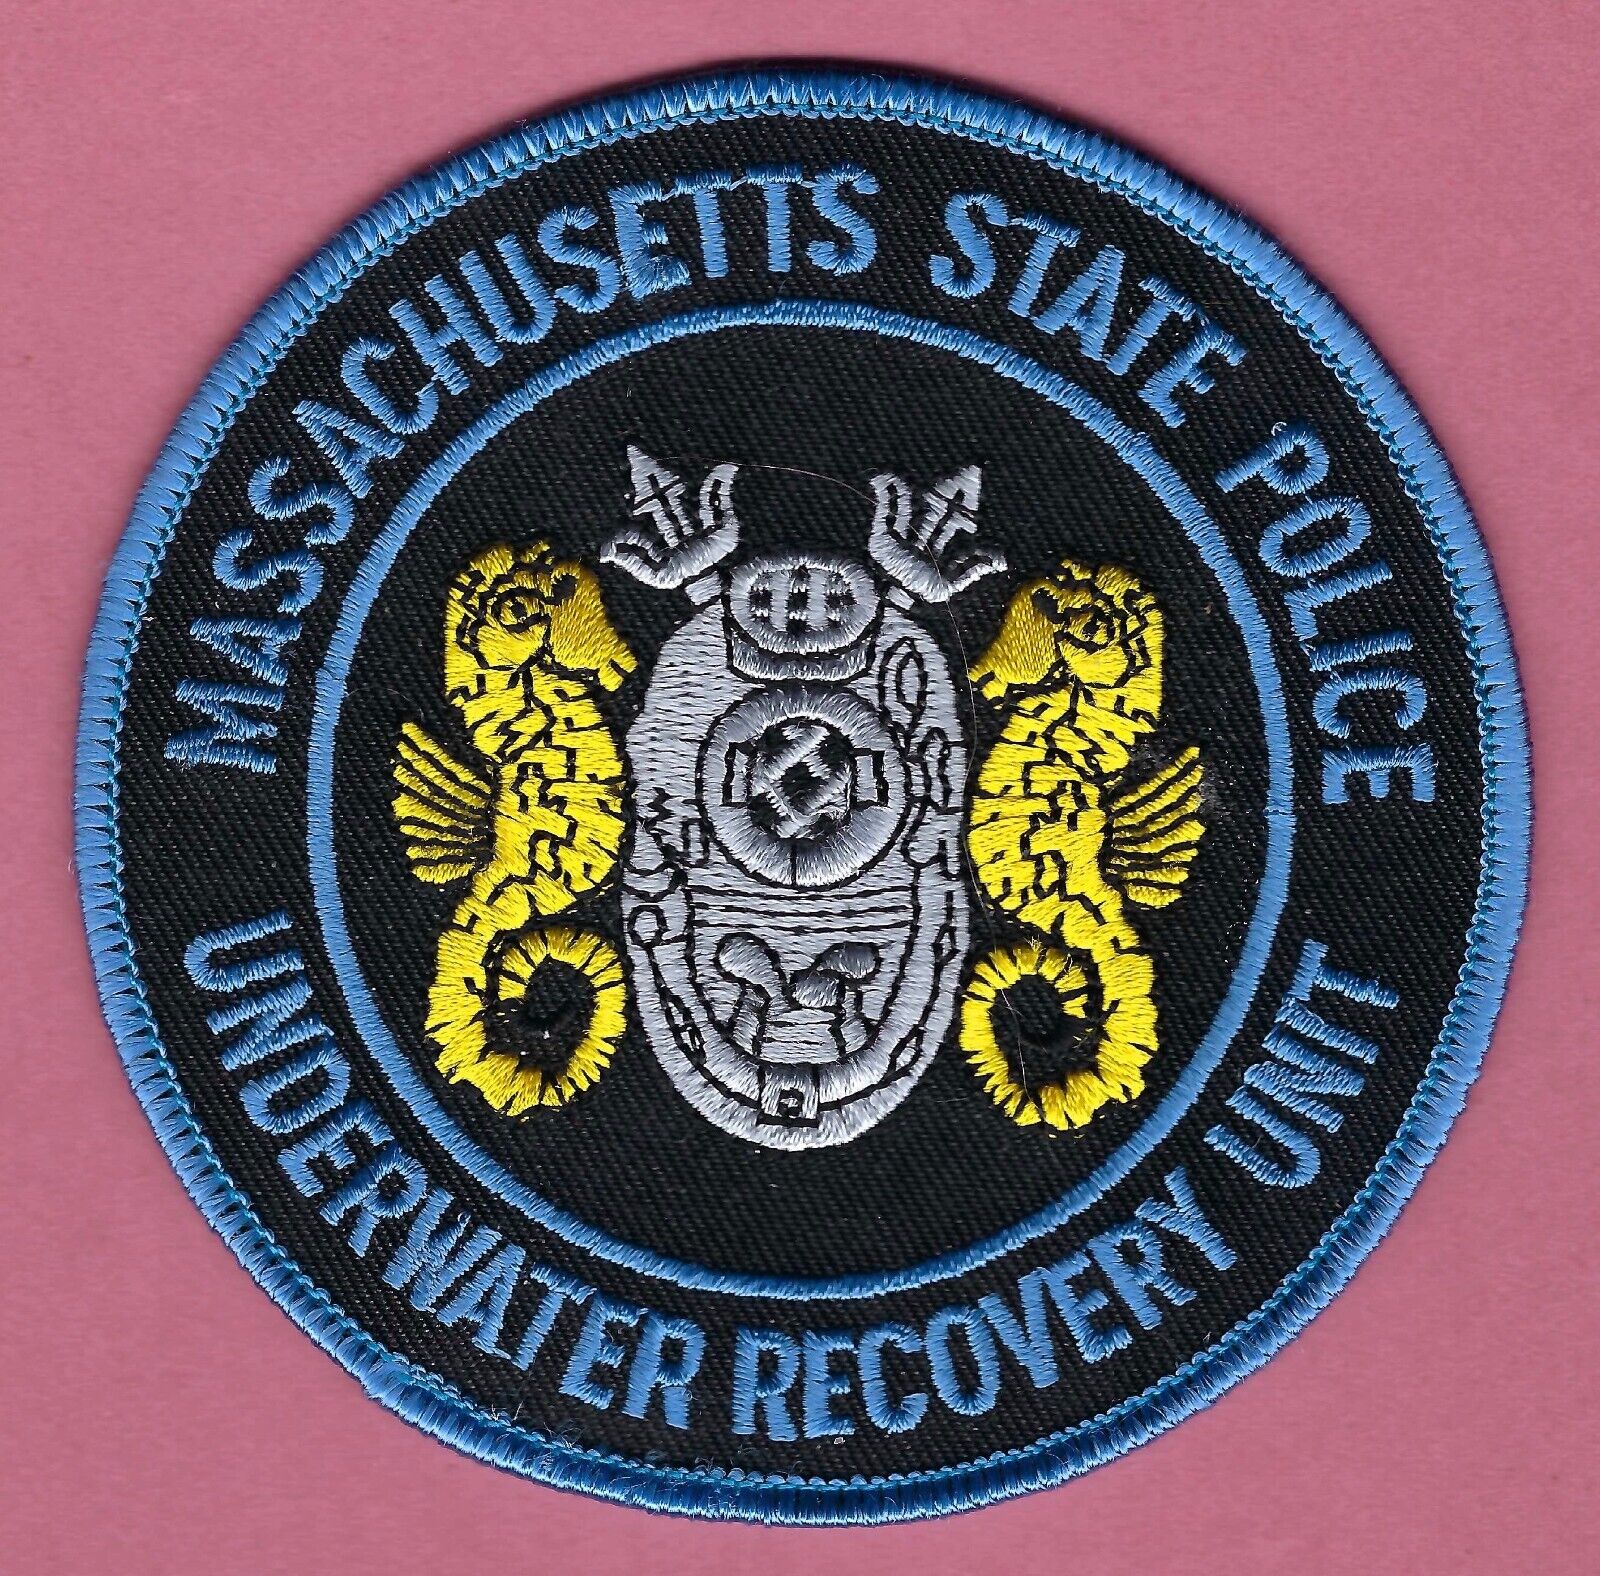 MASSACHUSETTS STATE POLICE UNDERWATER RECOVERY UNIT PATCH